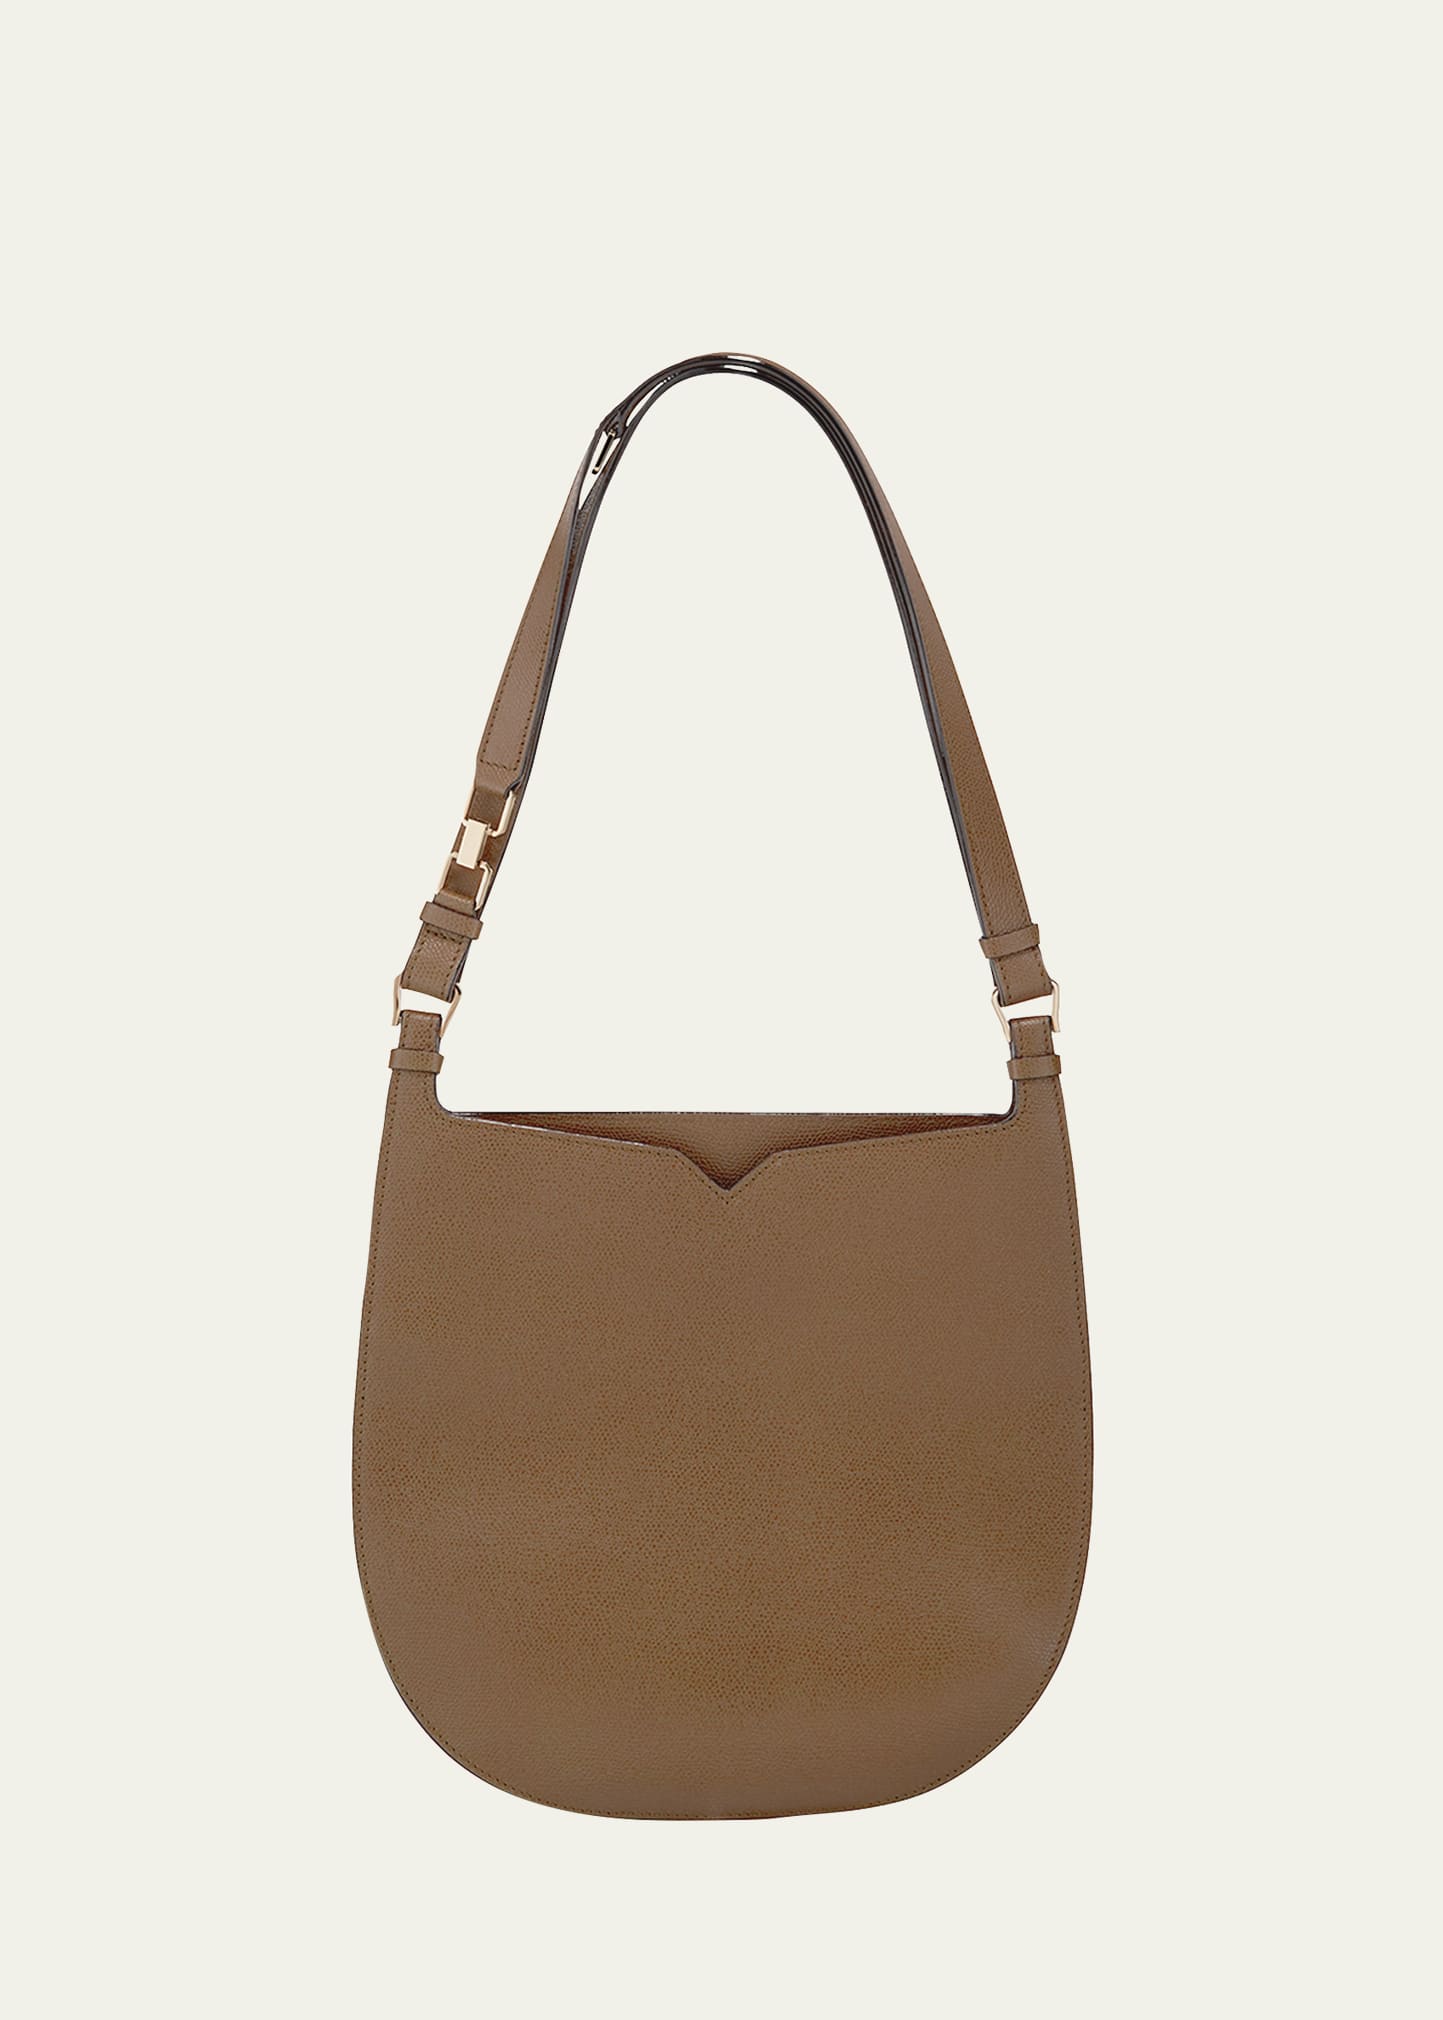 Valextra Saffiano Weekend Hobo Bag In Oyster